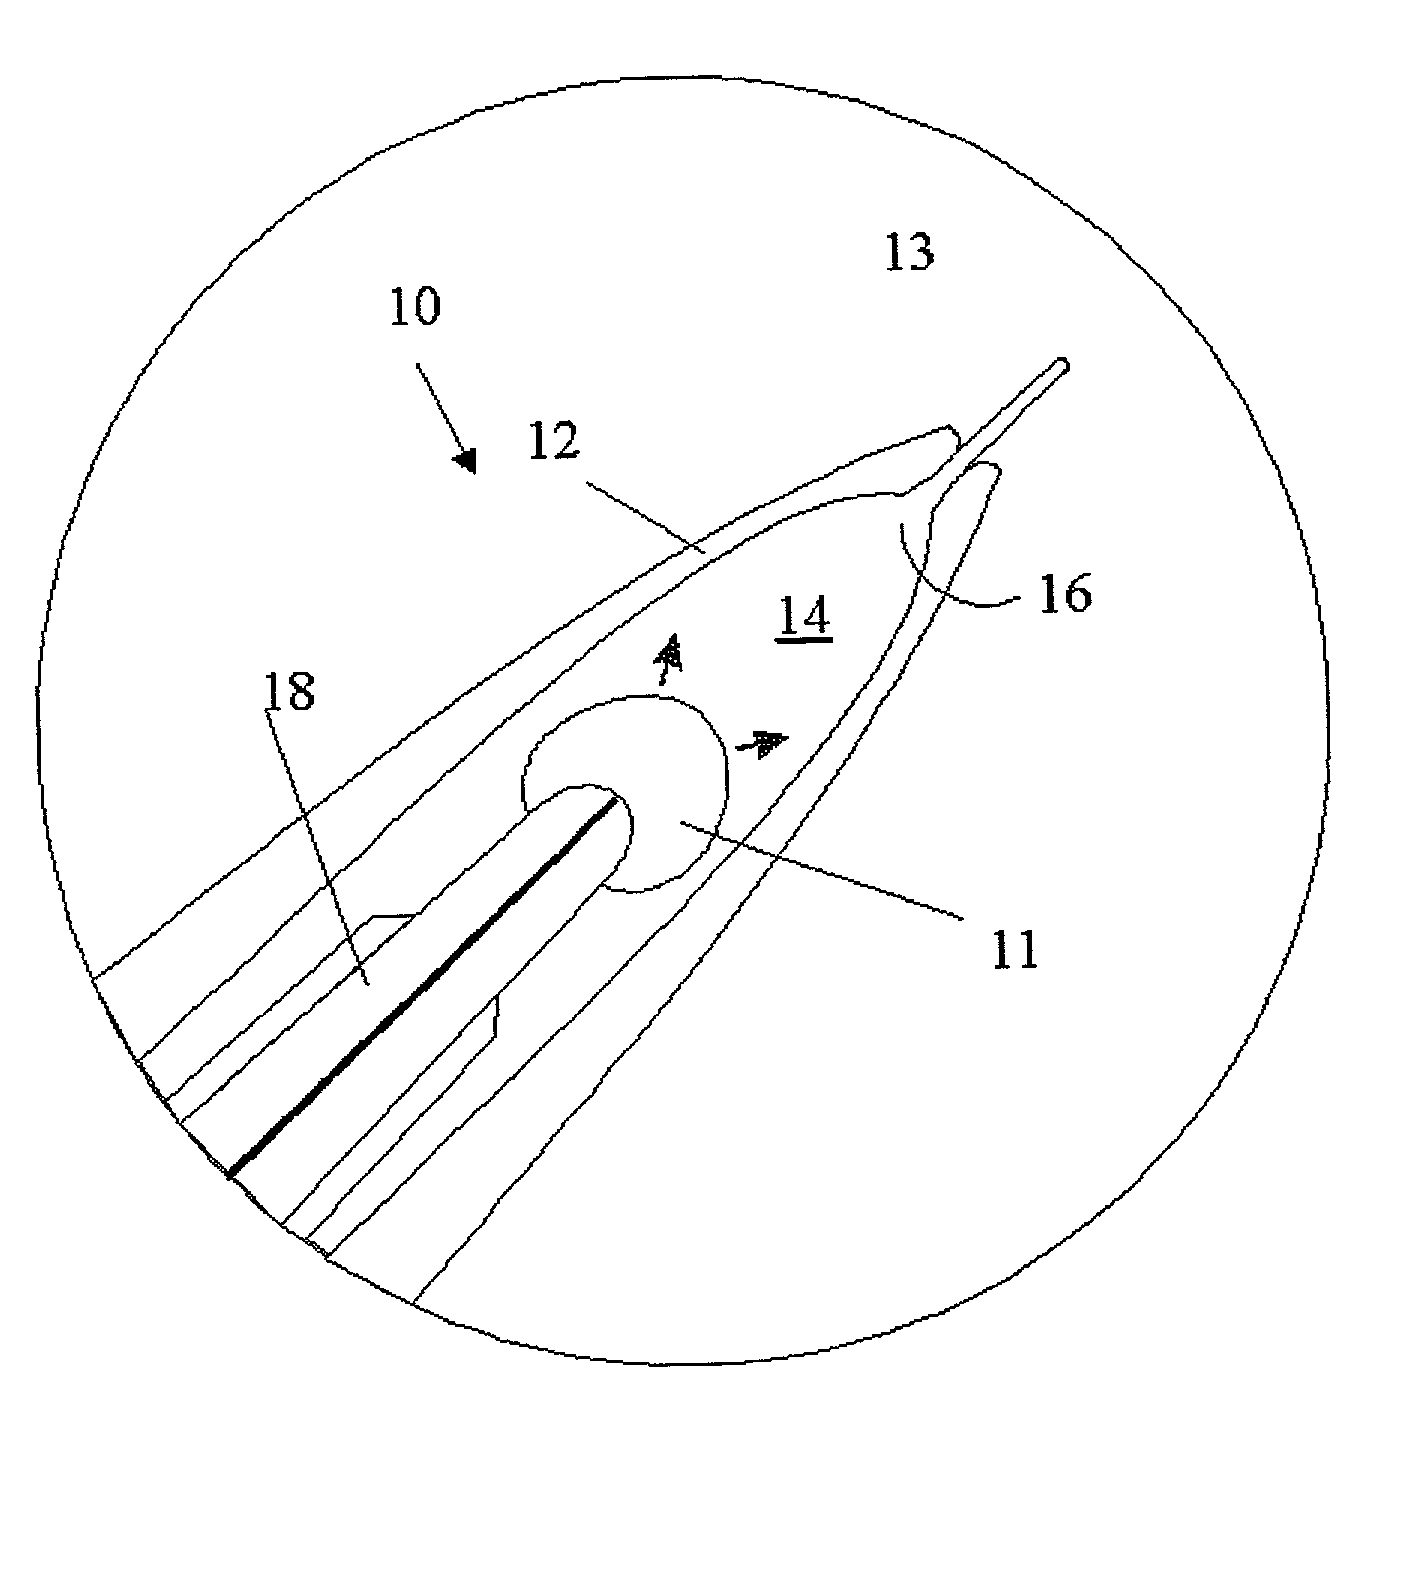 Microfluidic devices and methods for producing pulsed microfluidic jets in a liquid environment